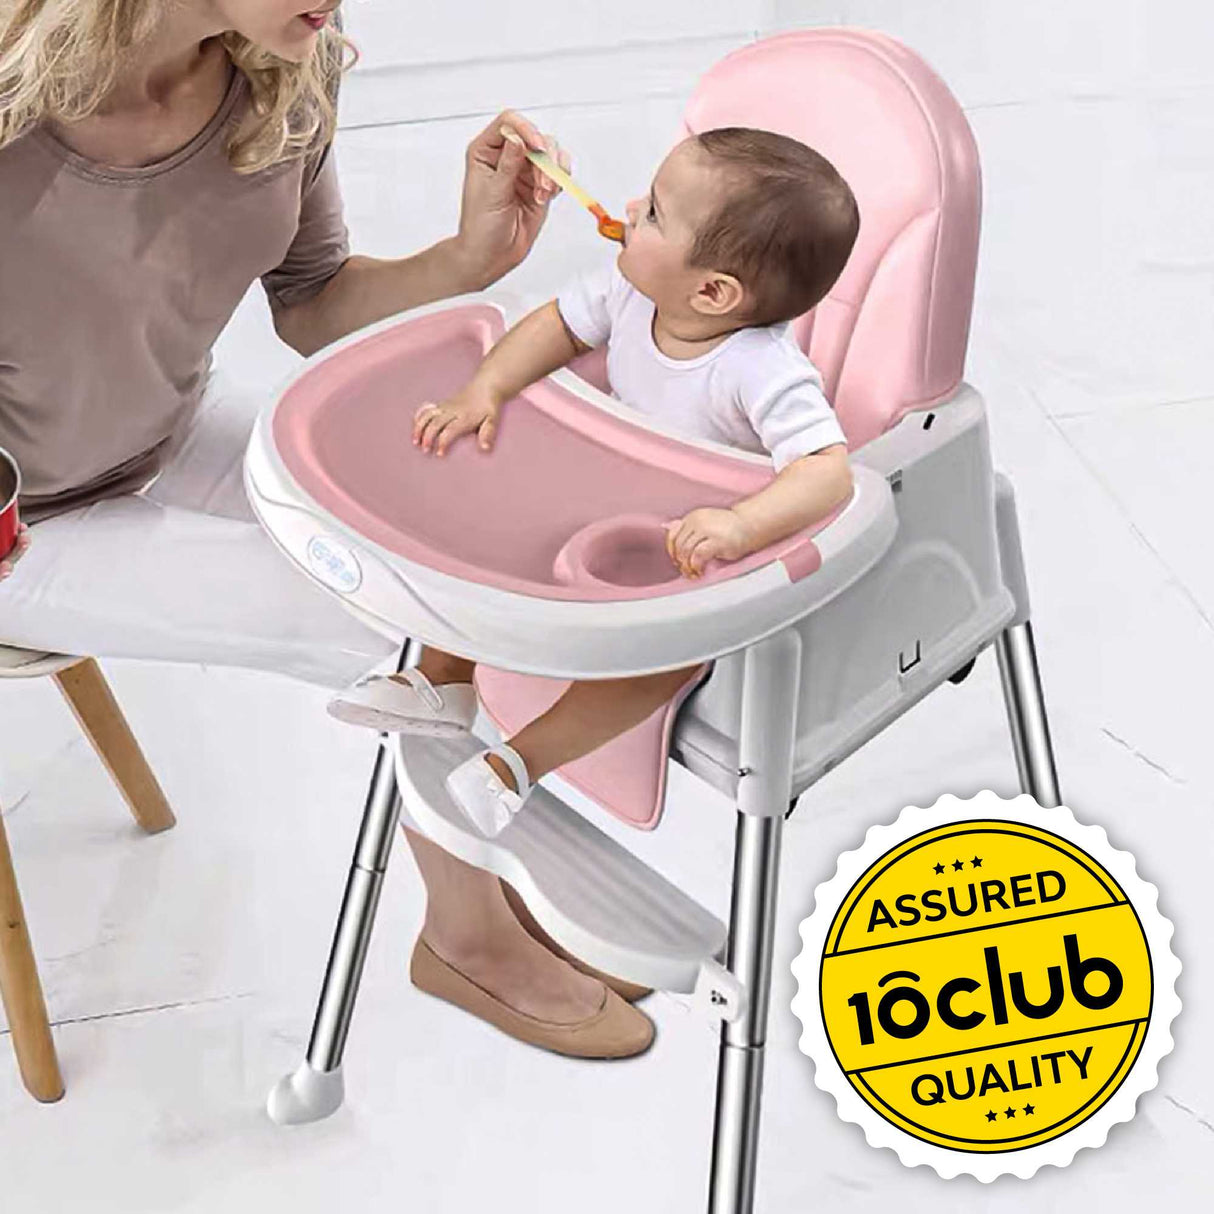 Baby in pink high chair